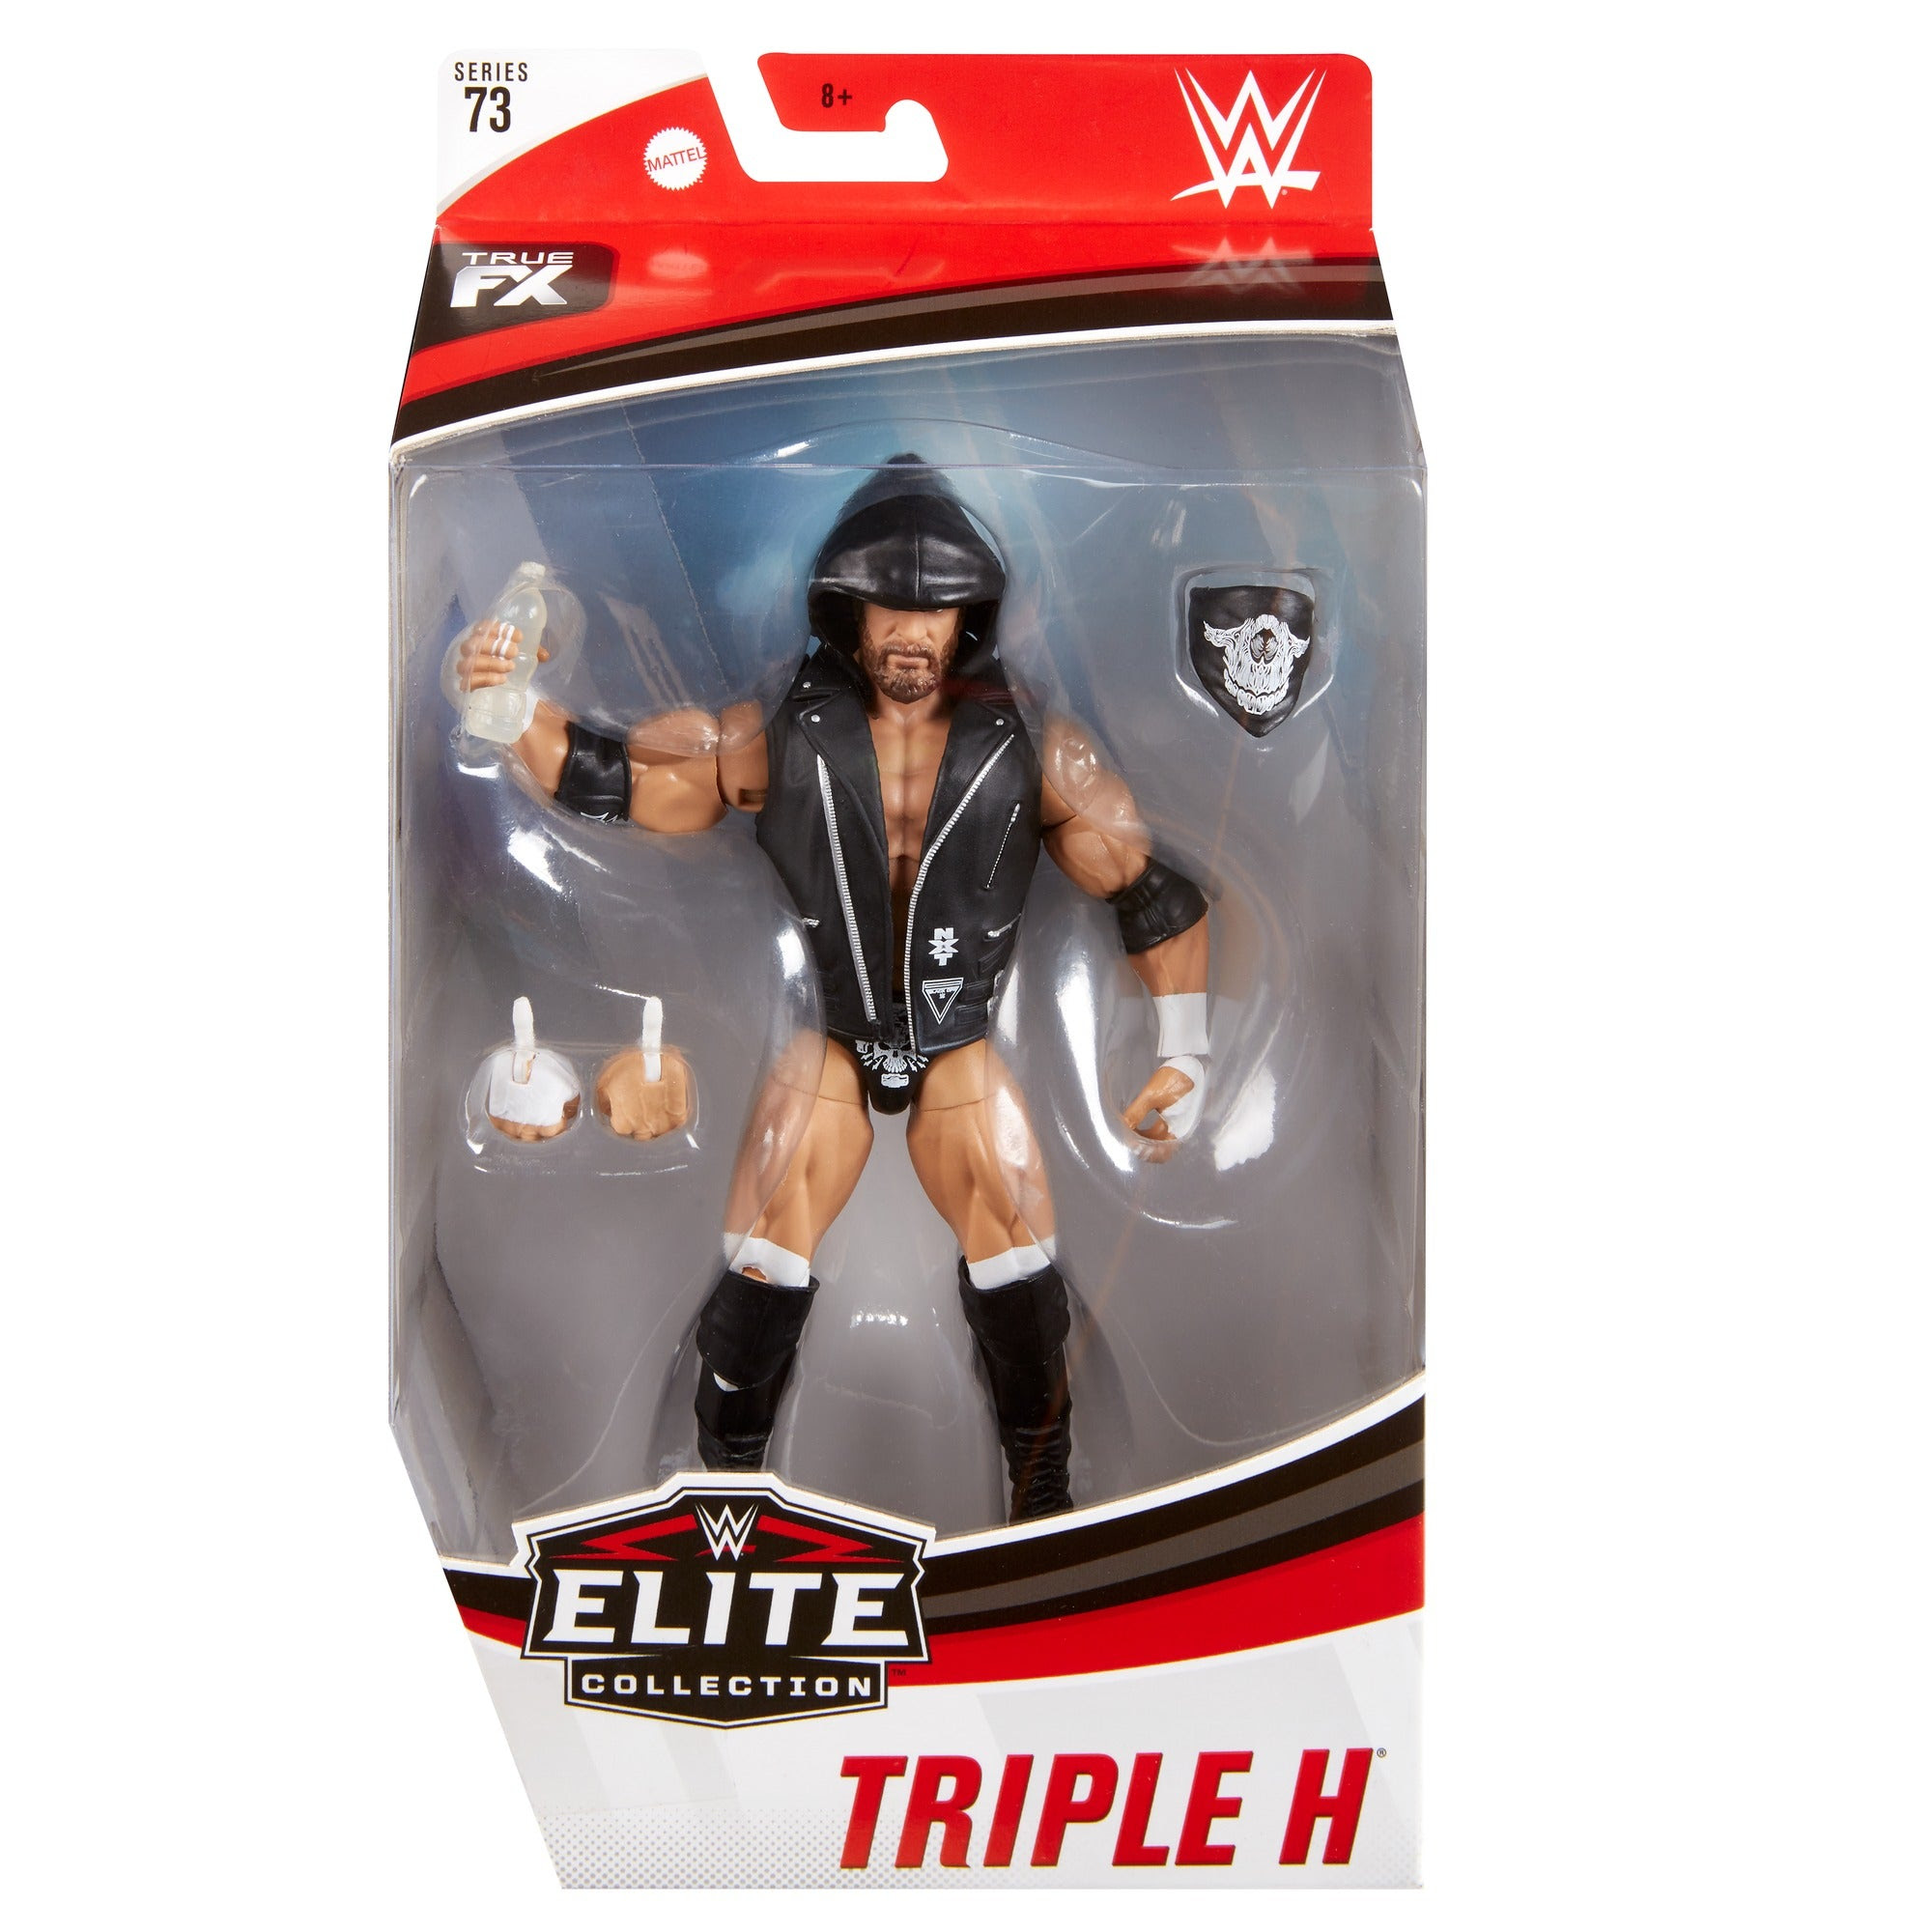 Image of WWE Elite Collection Series 73 - Triple H